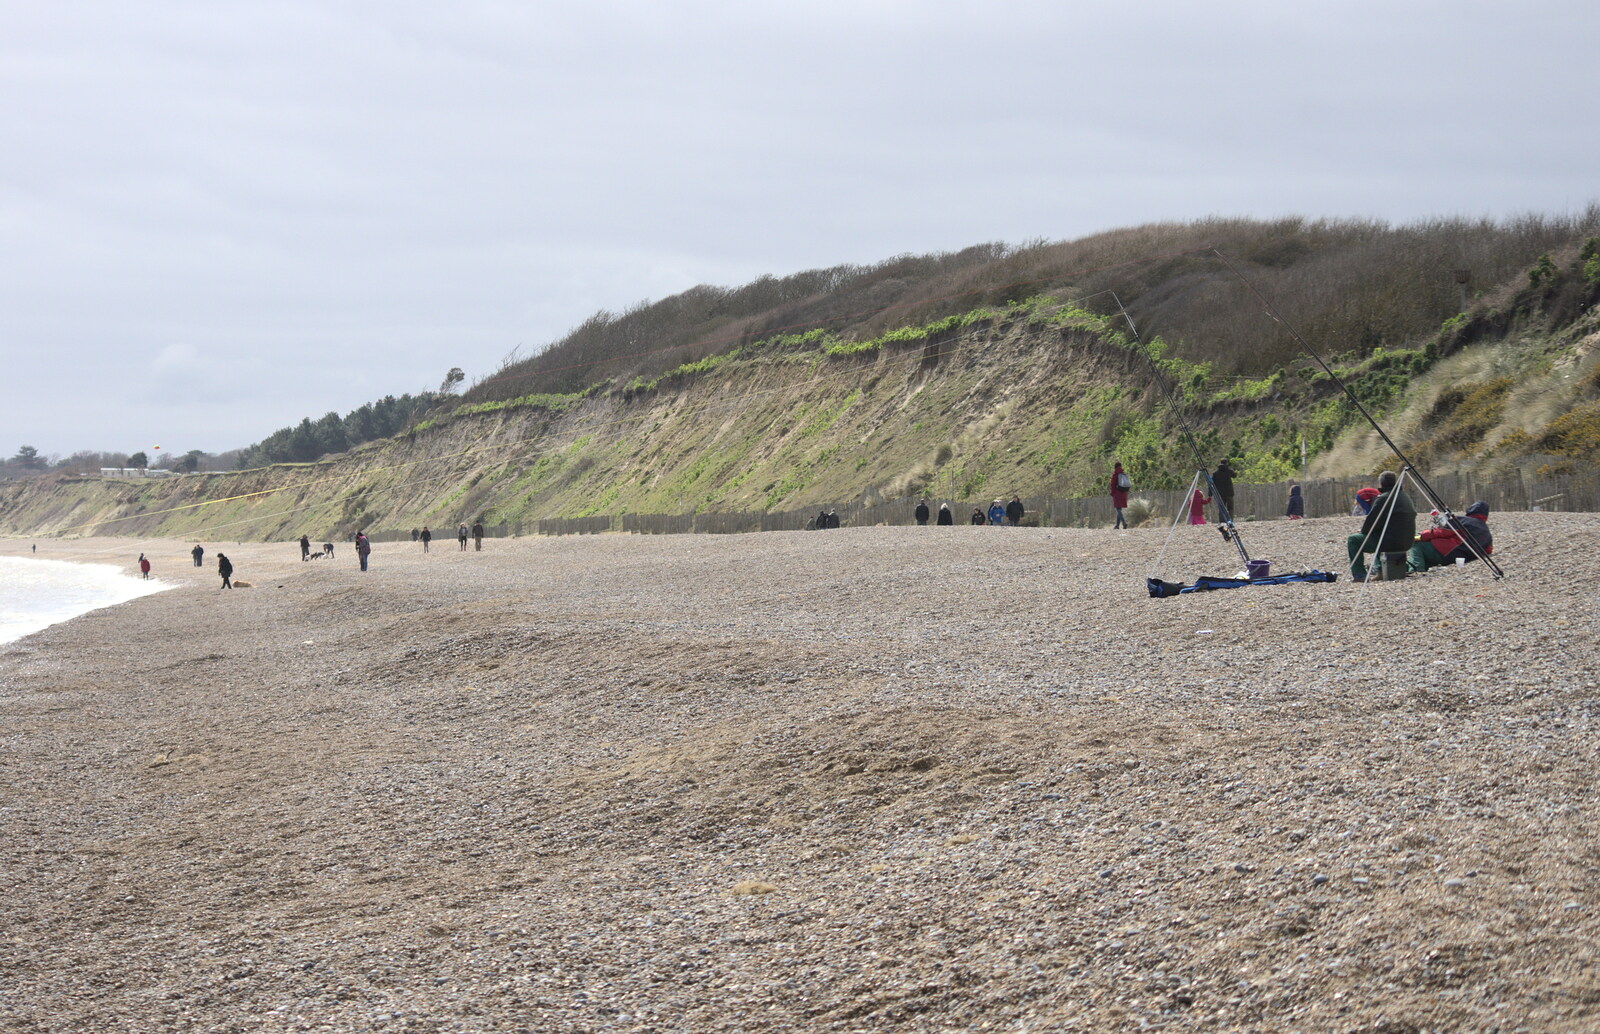 On the beach at Dunwich from A Day on the Beach, Dunwich, Suffolk - 6th April 2015